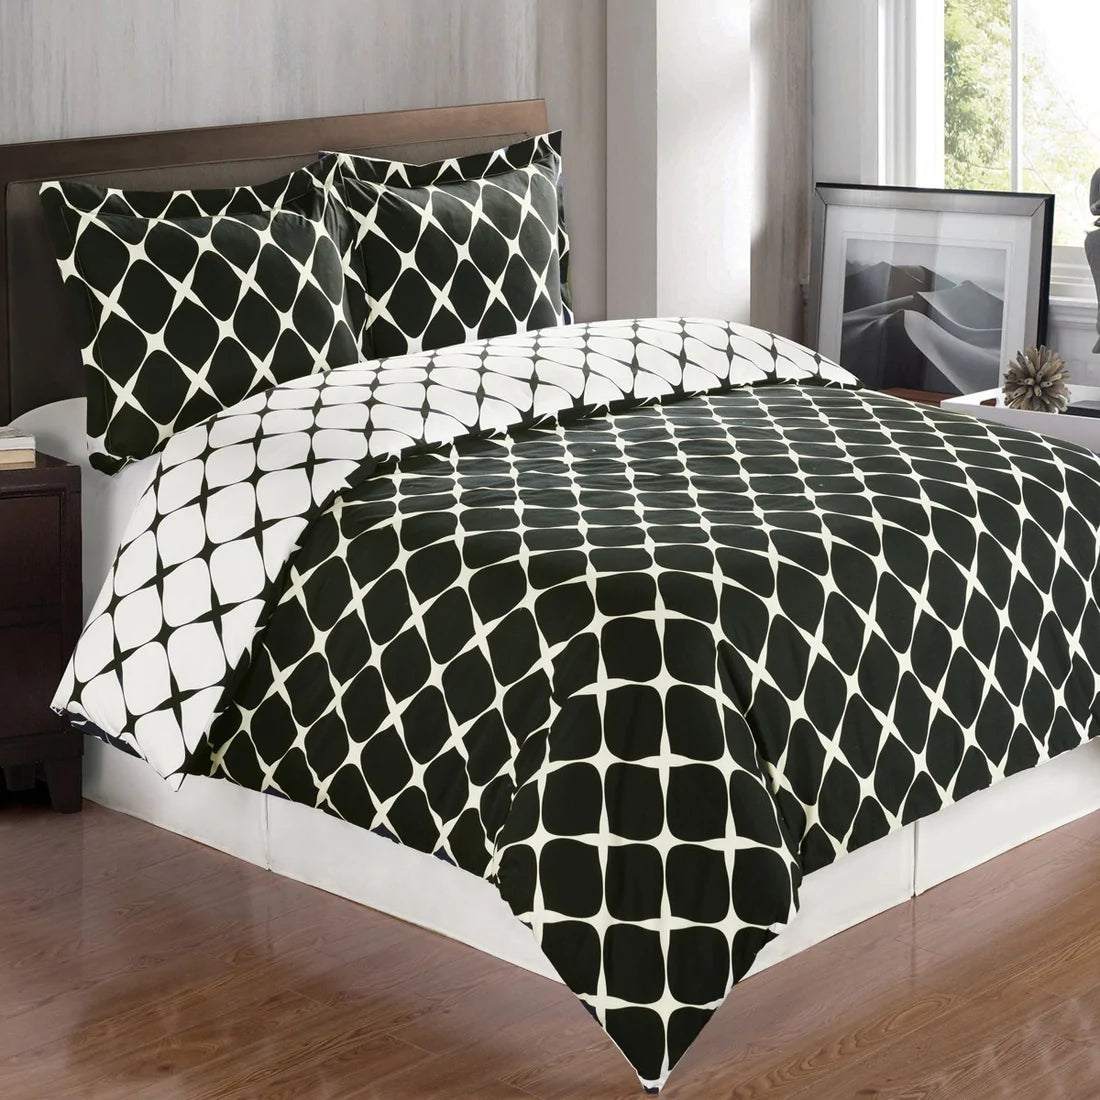 Bloomingdale Black and White 3PC Duvet Covers Set